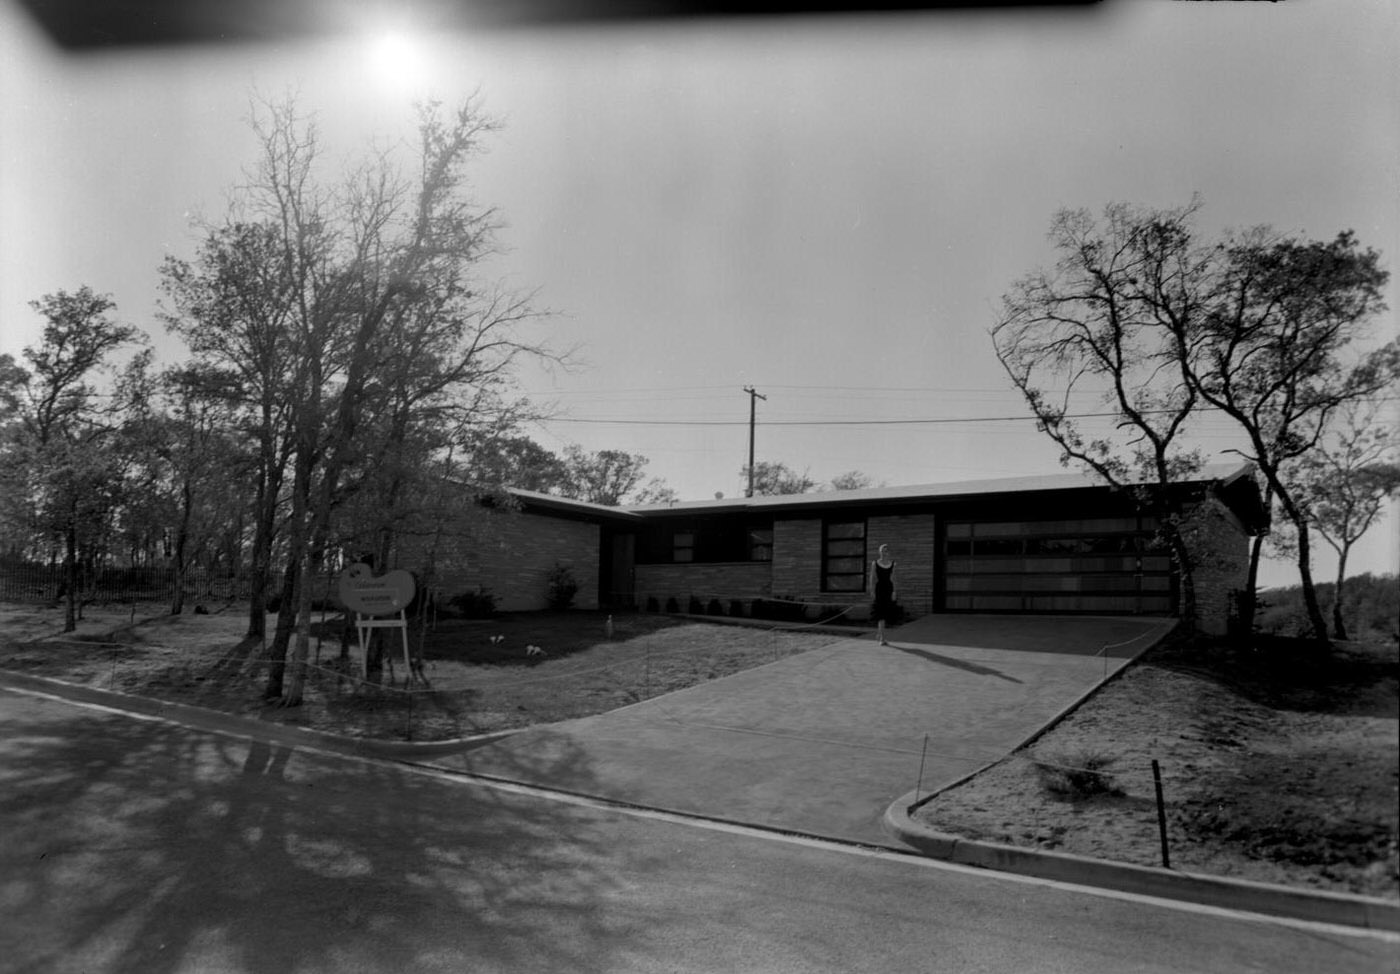 Wilkerson Built Home with Woman in Driveway, 1956.